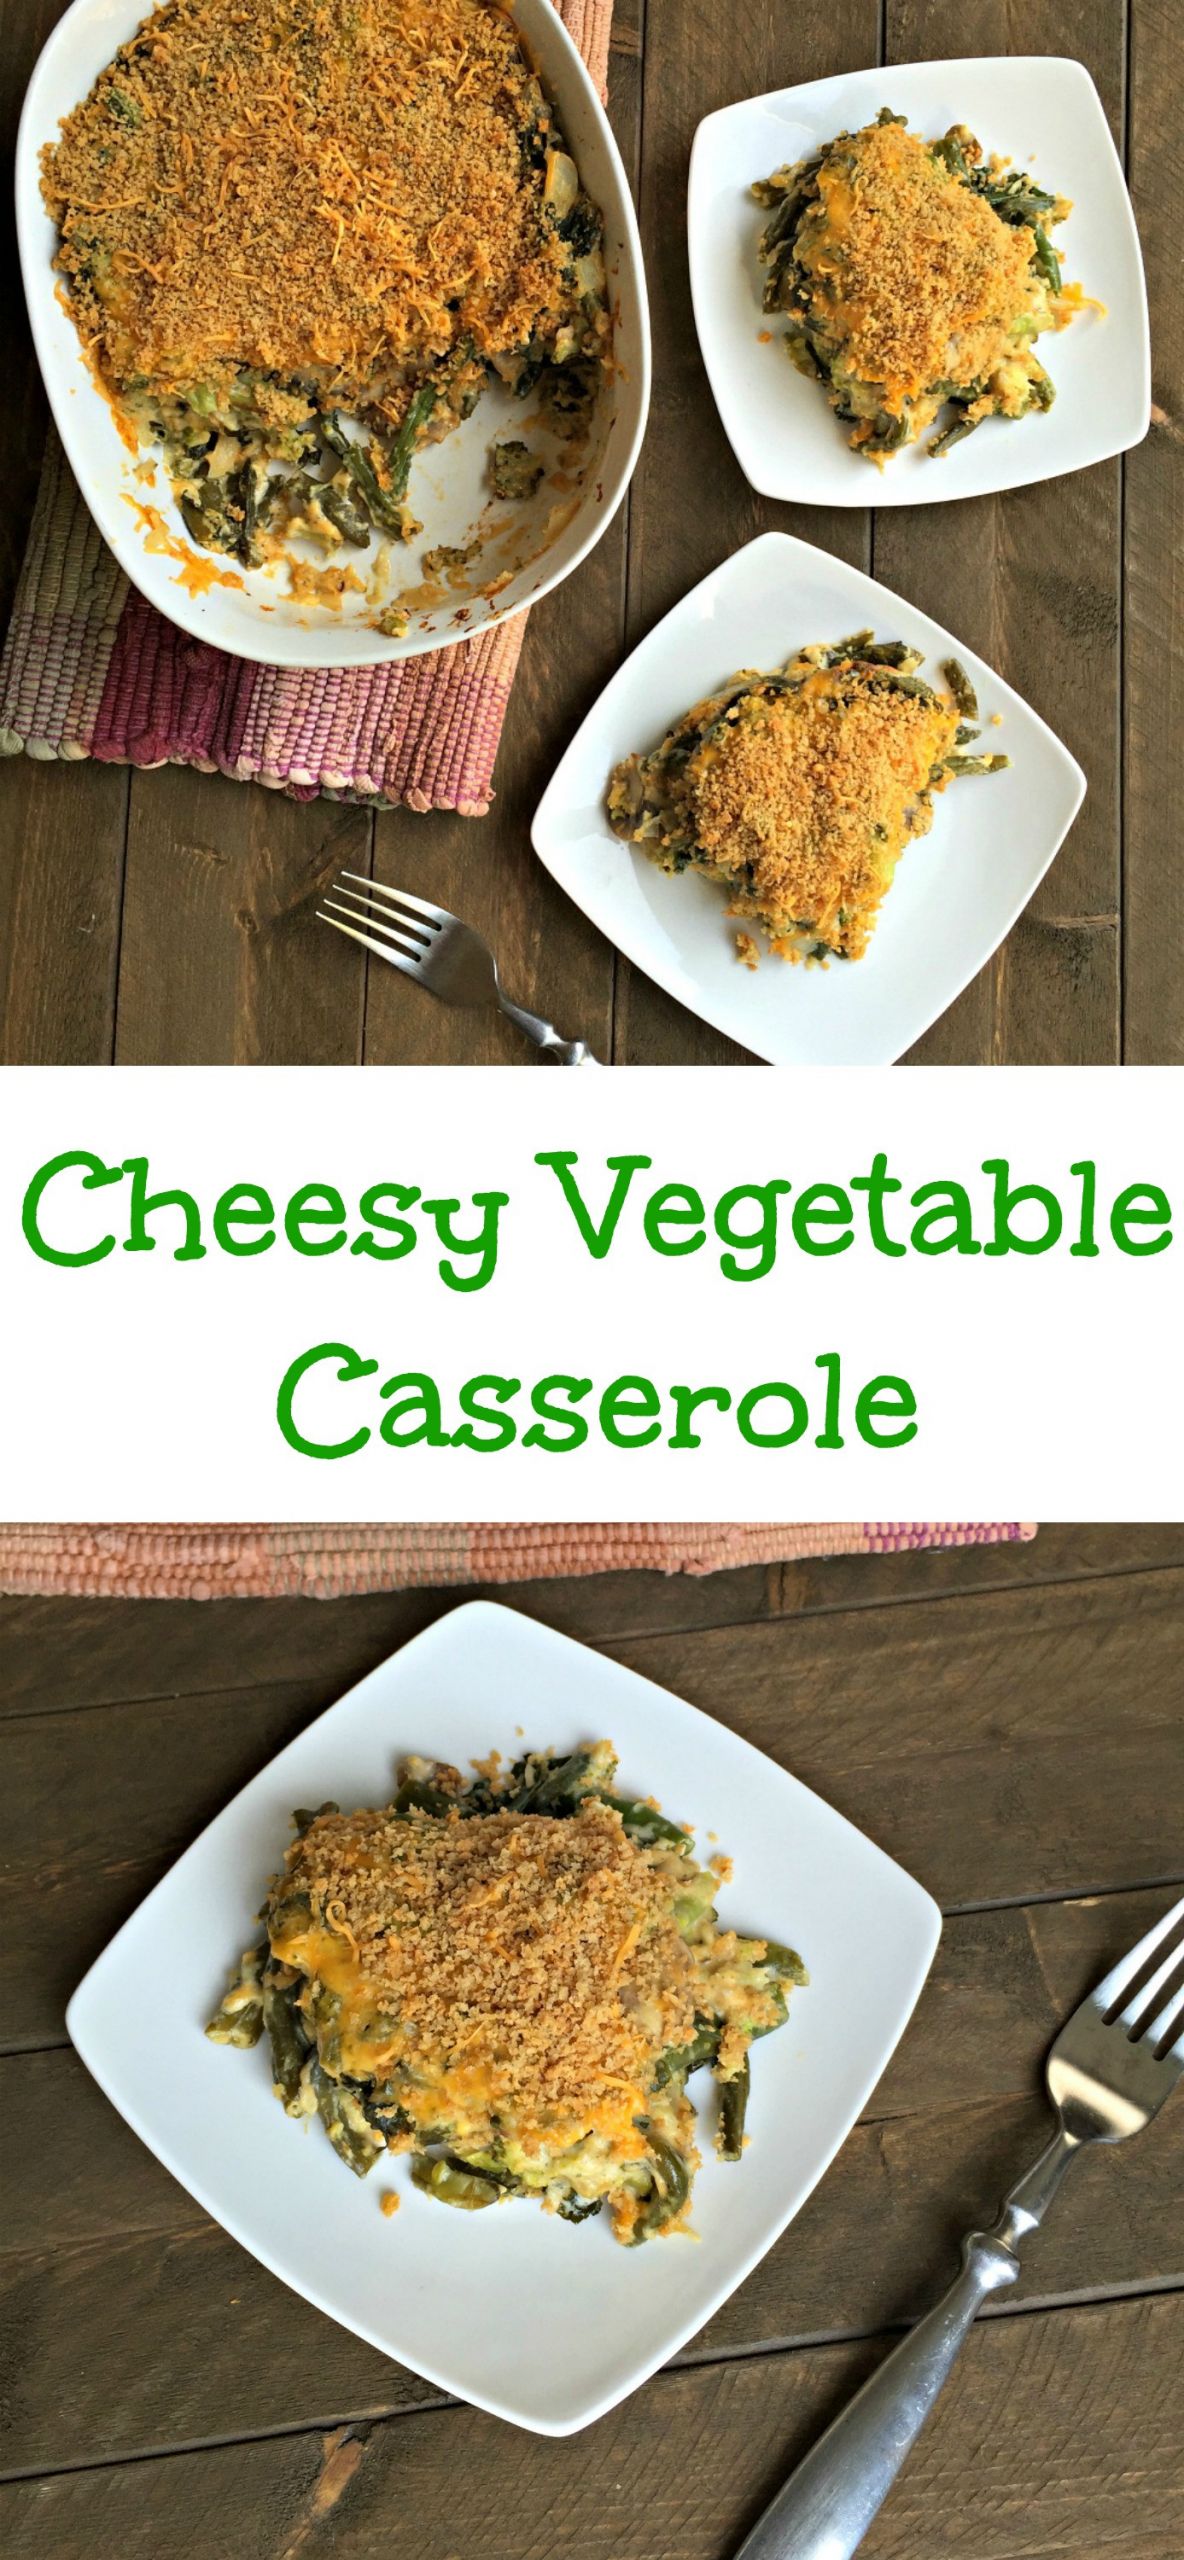 Vegetable Casserole Side Dishes
 Cheesy Ve able Casserole